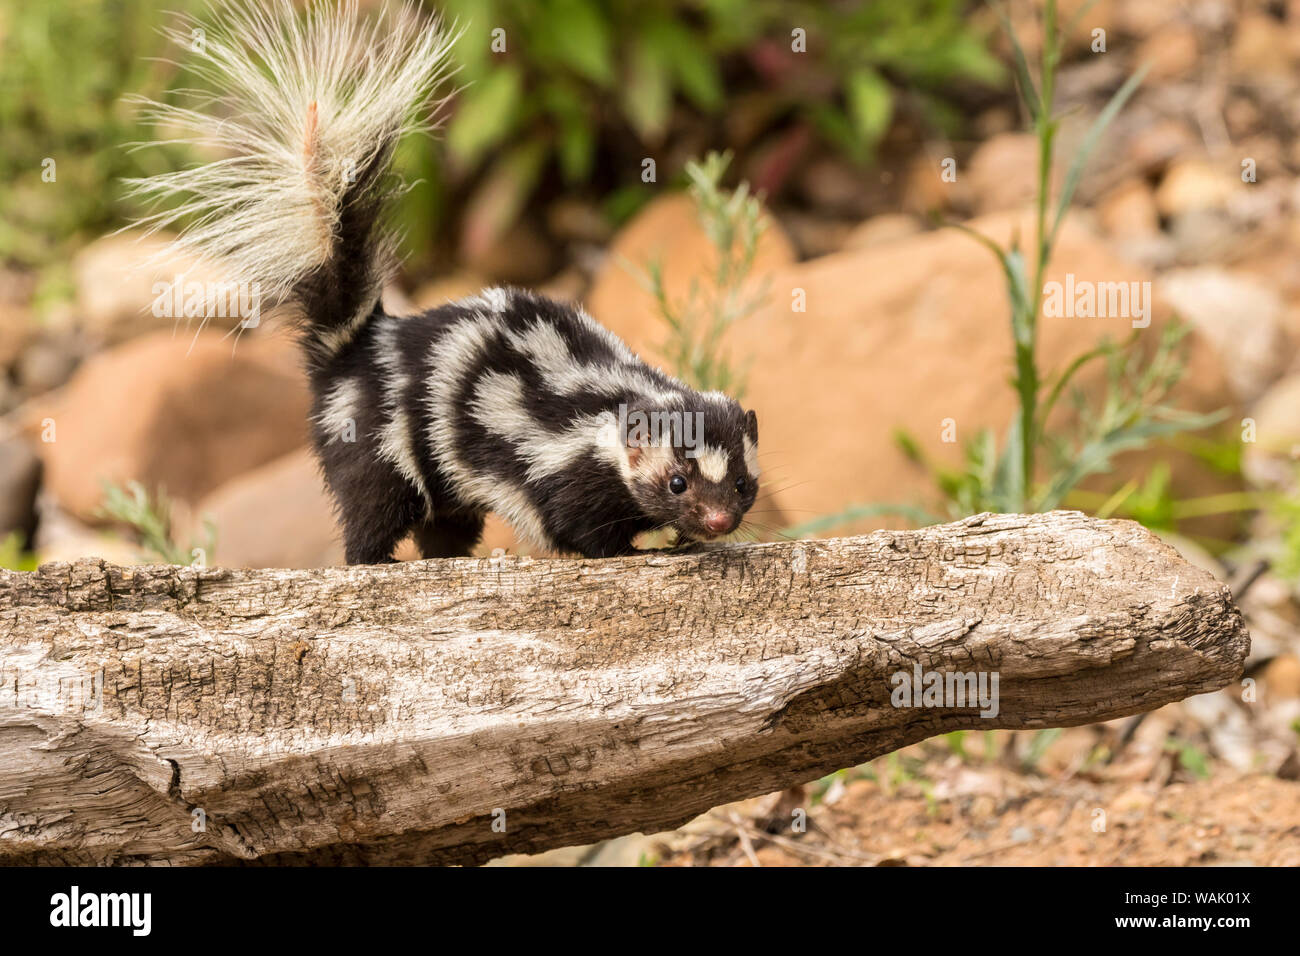 Pine County. Captive spotted skunk. Credit as: Cathy and Gordon Illg / Jaynes Gallery / DanitaDelimont.com Stock Photo